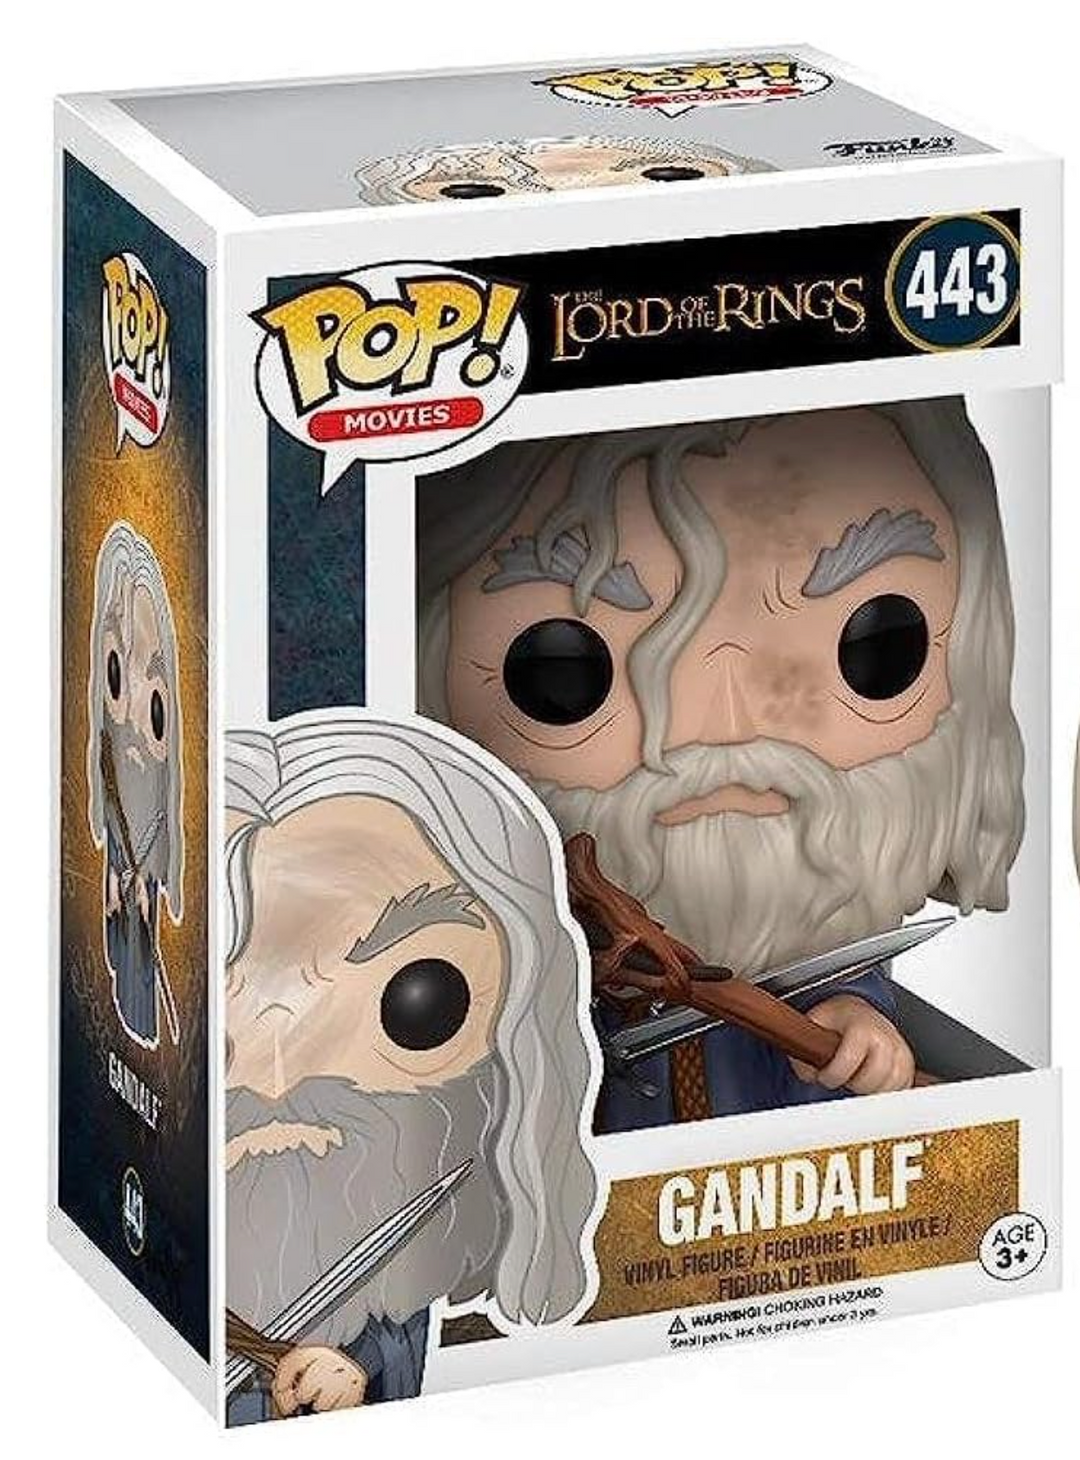 Gandalf The Lord of the Rings Funko POP! Vinyl Figure